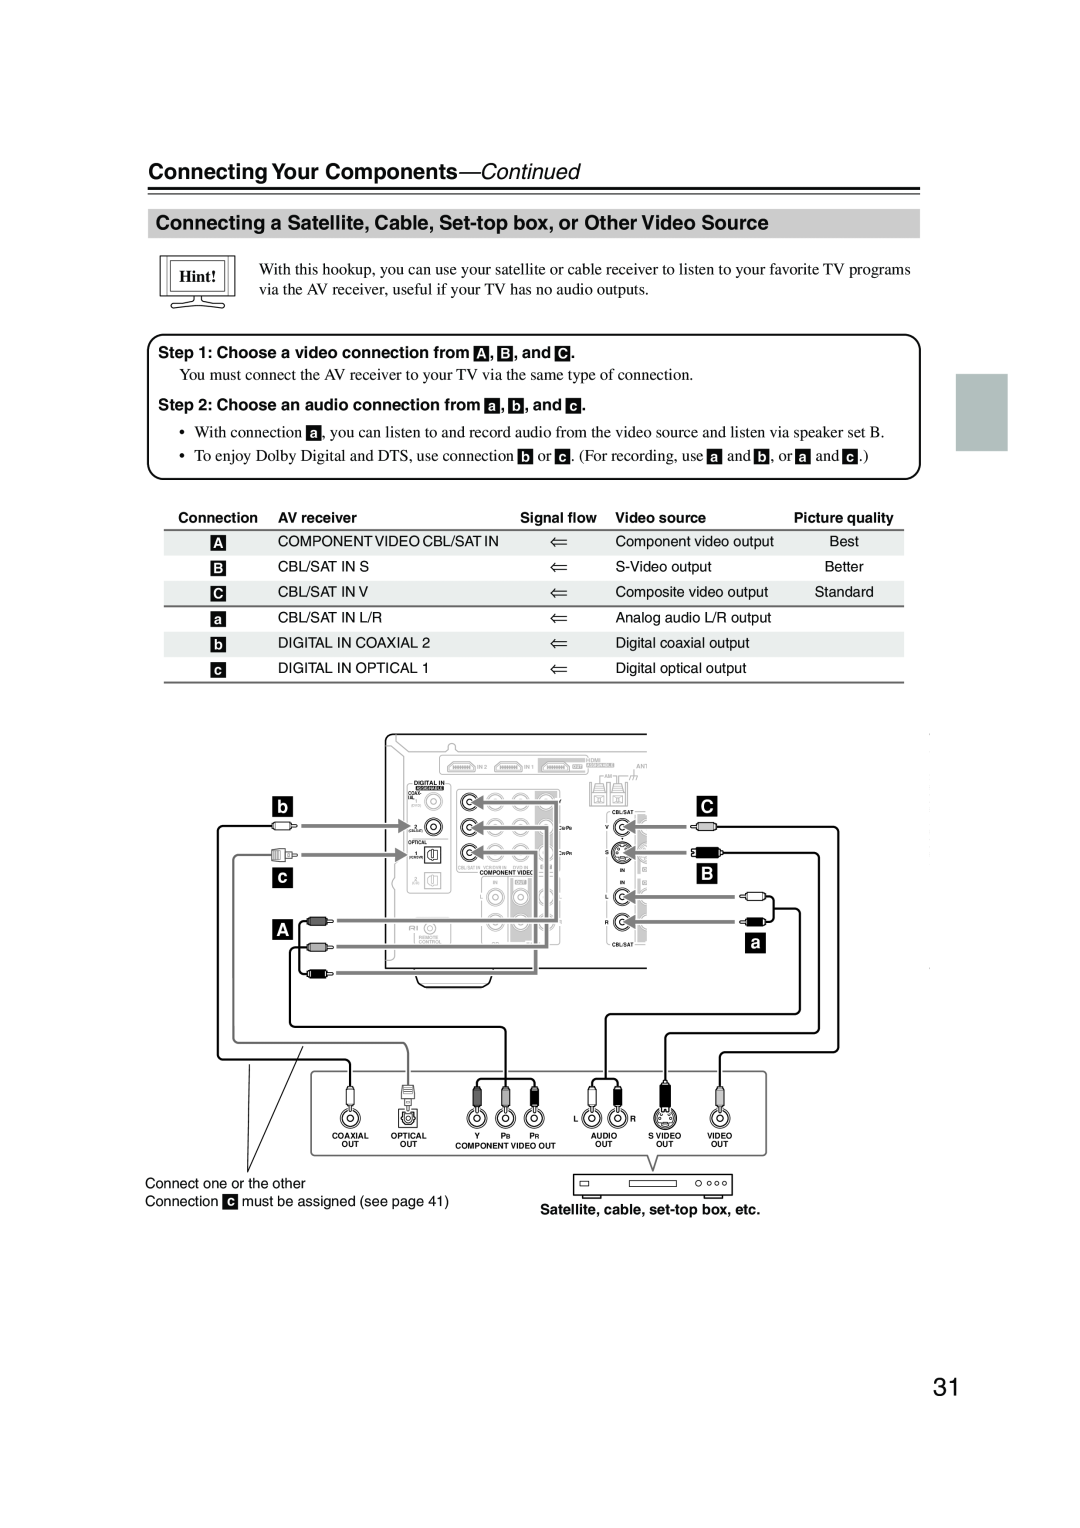 Onkyo HT-SP904 instruction manual Connecting Your Components—Continued, b c A, Hint, AV receiver, Video source 